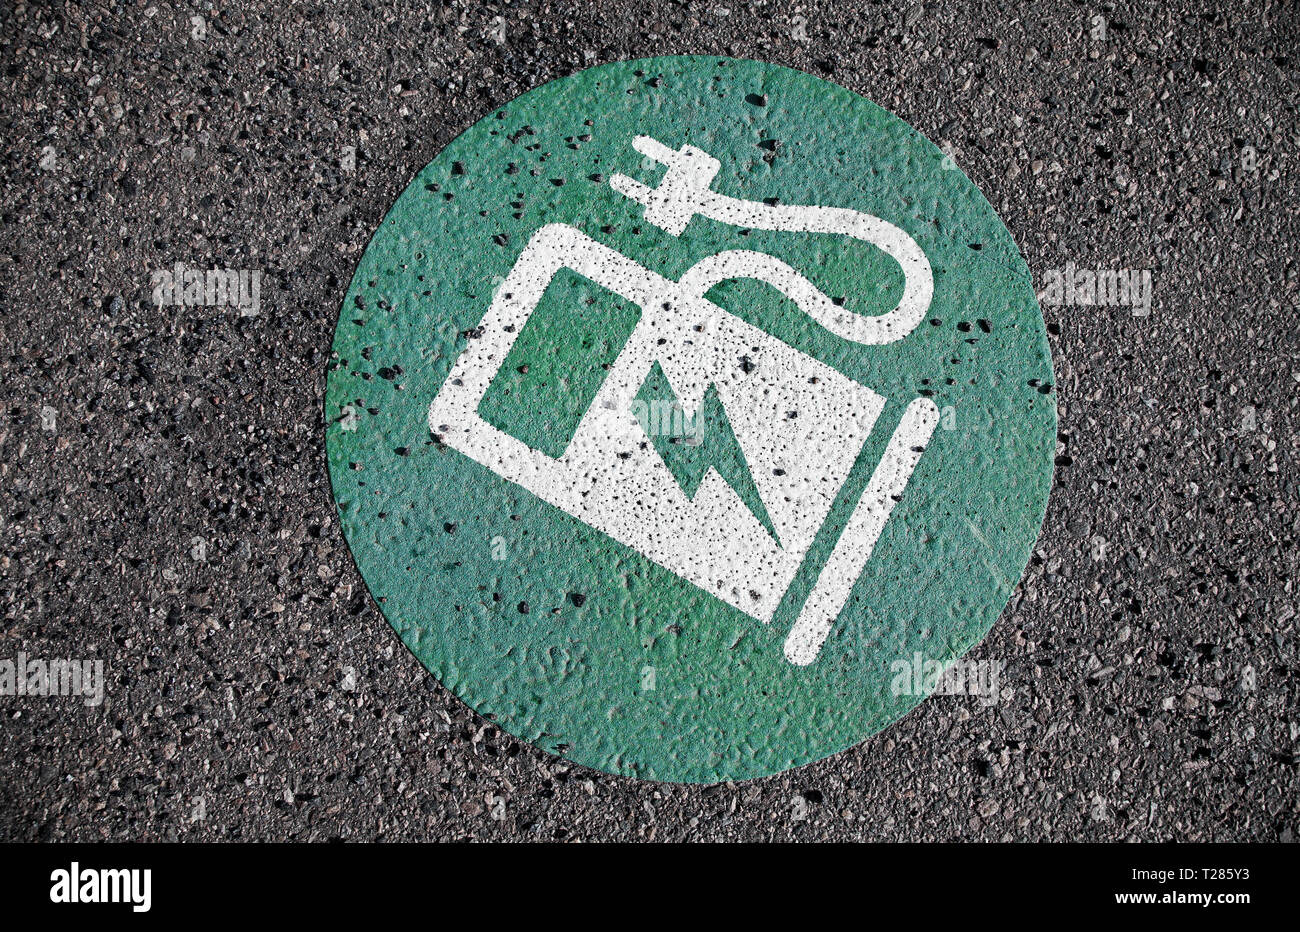 VADSTENA 2017-03-21 Symbol, at a parking lot, for charging station of electric car. Photo Jeppe Gustafsson Stock Photo